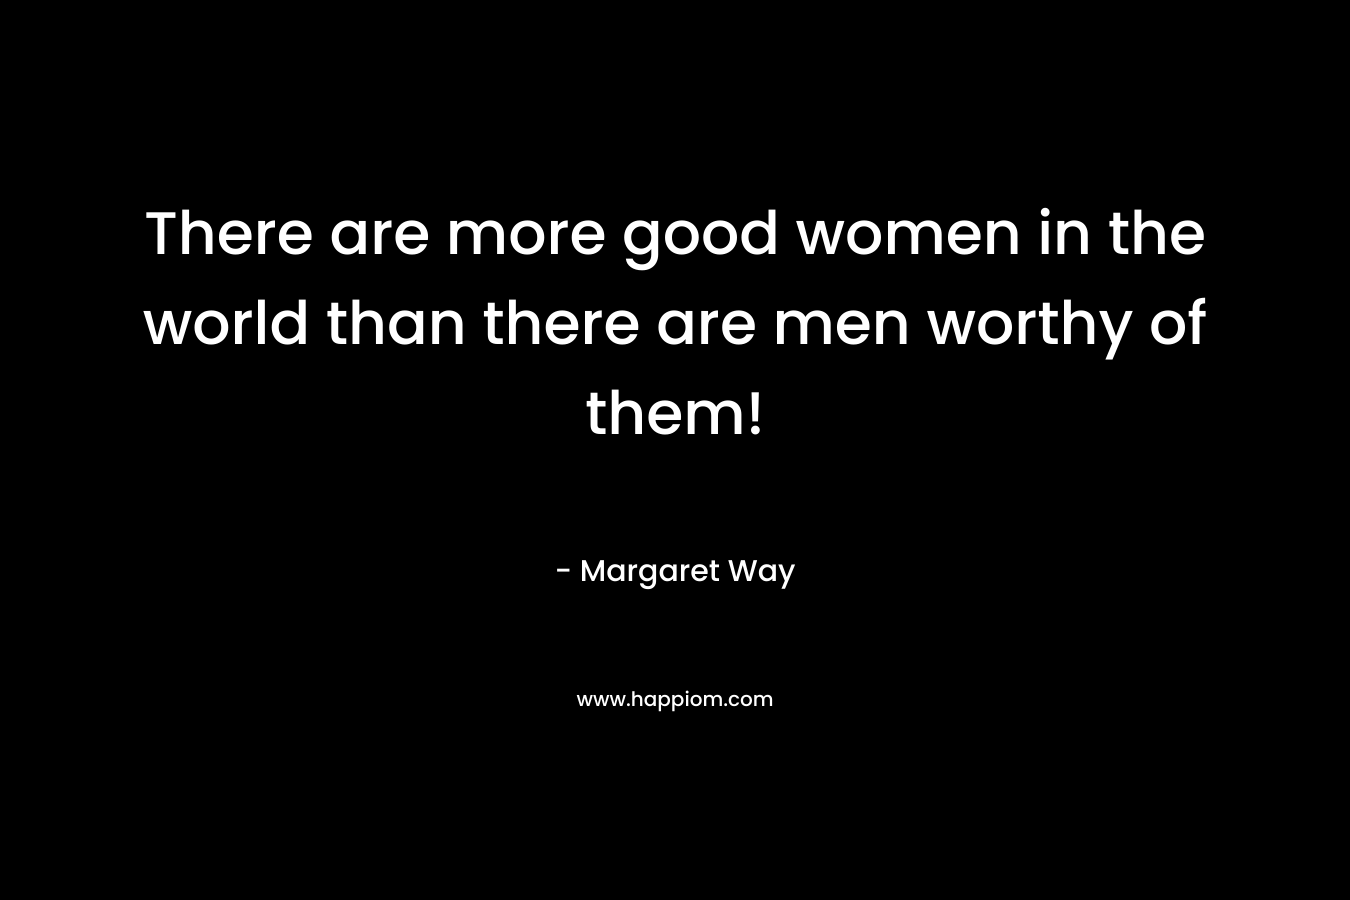 There are more good women in the world than there are men worthy of them!